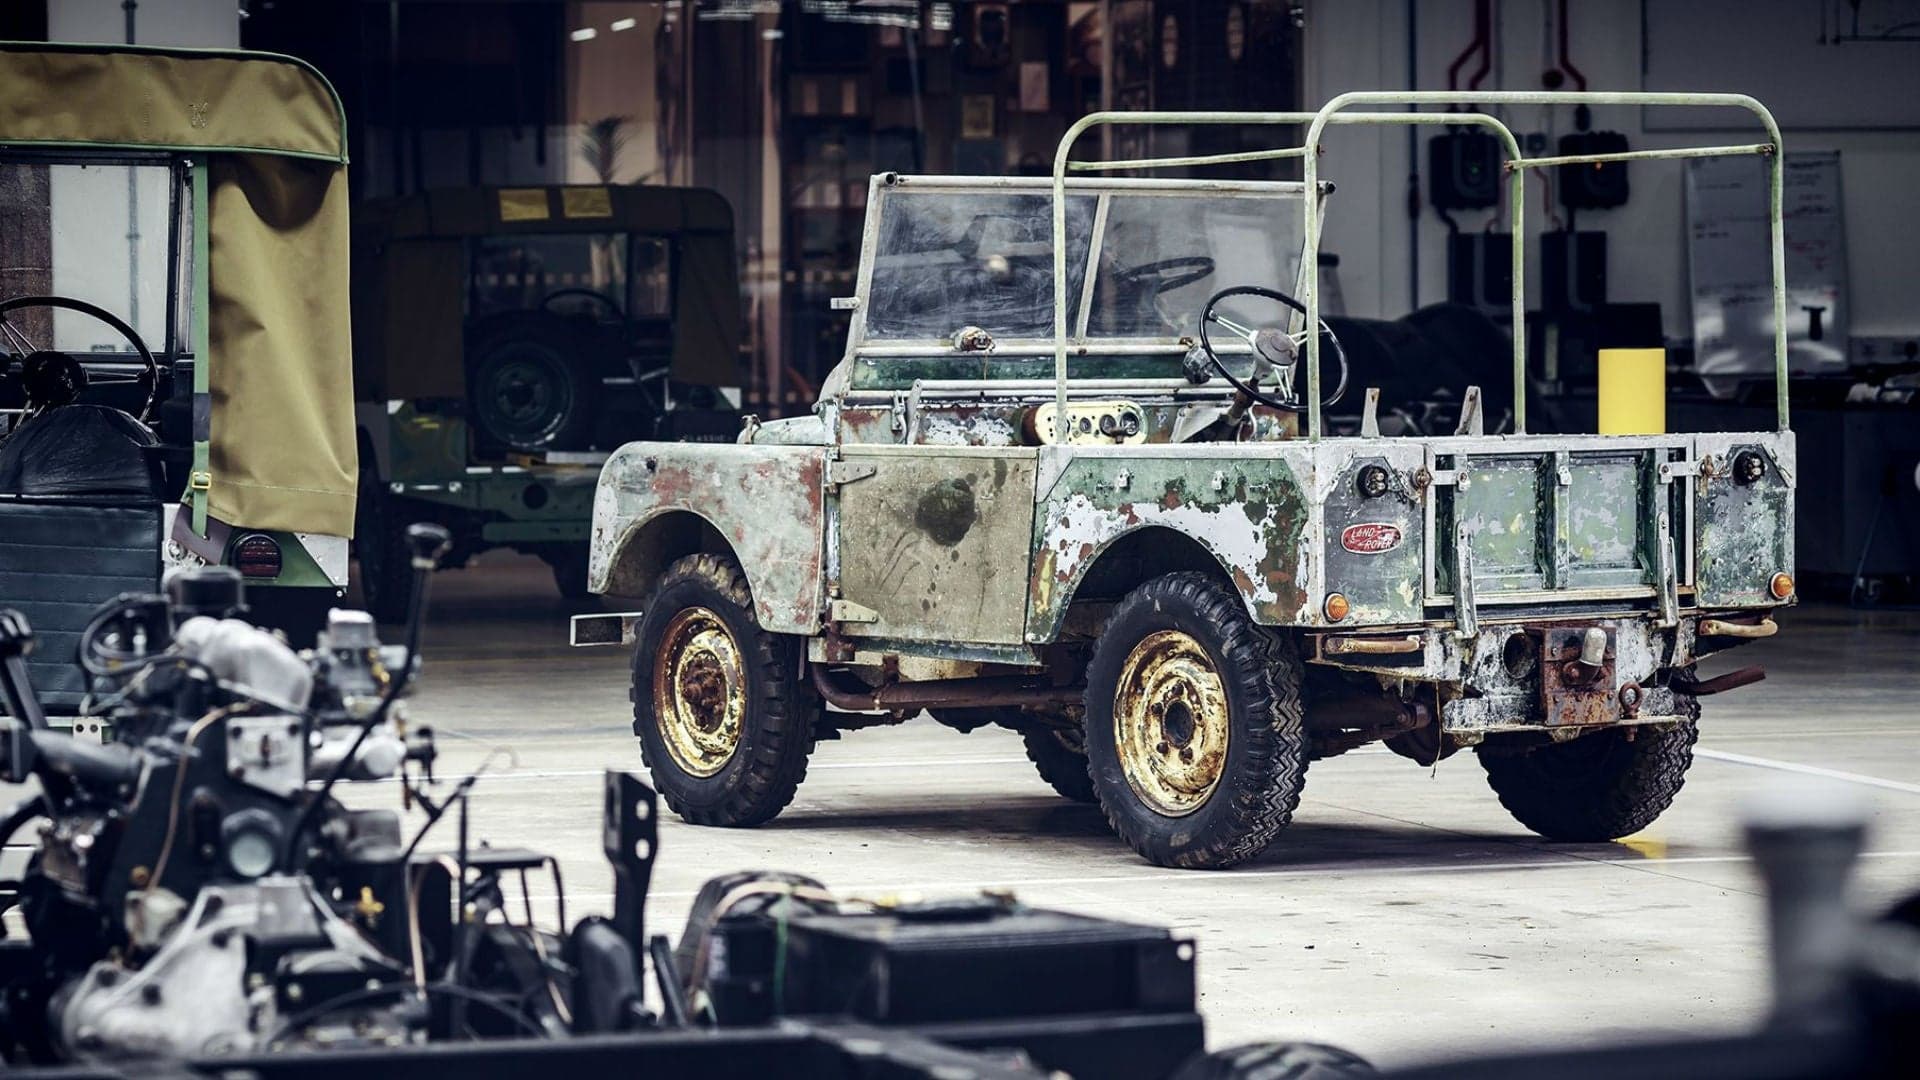 Land Rover Begins Restoration of First Series 1 Ever Seen by Public